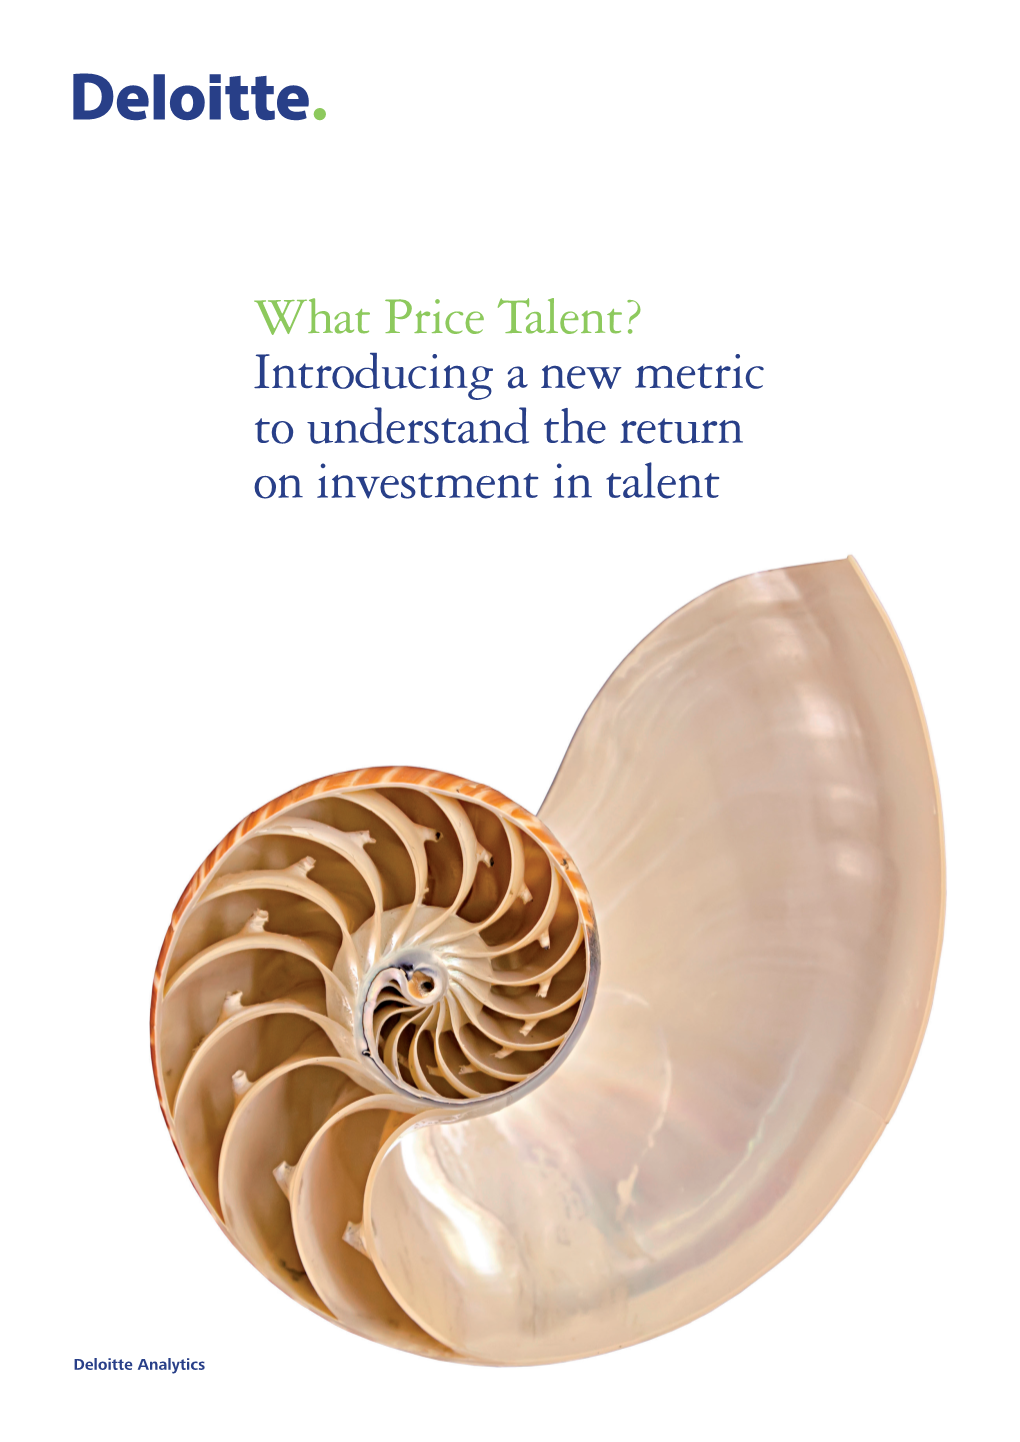 What Price Talent? Introducing a New Metric to Understand the Return on Investment in Talent